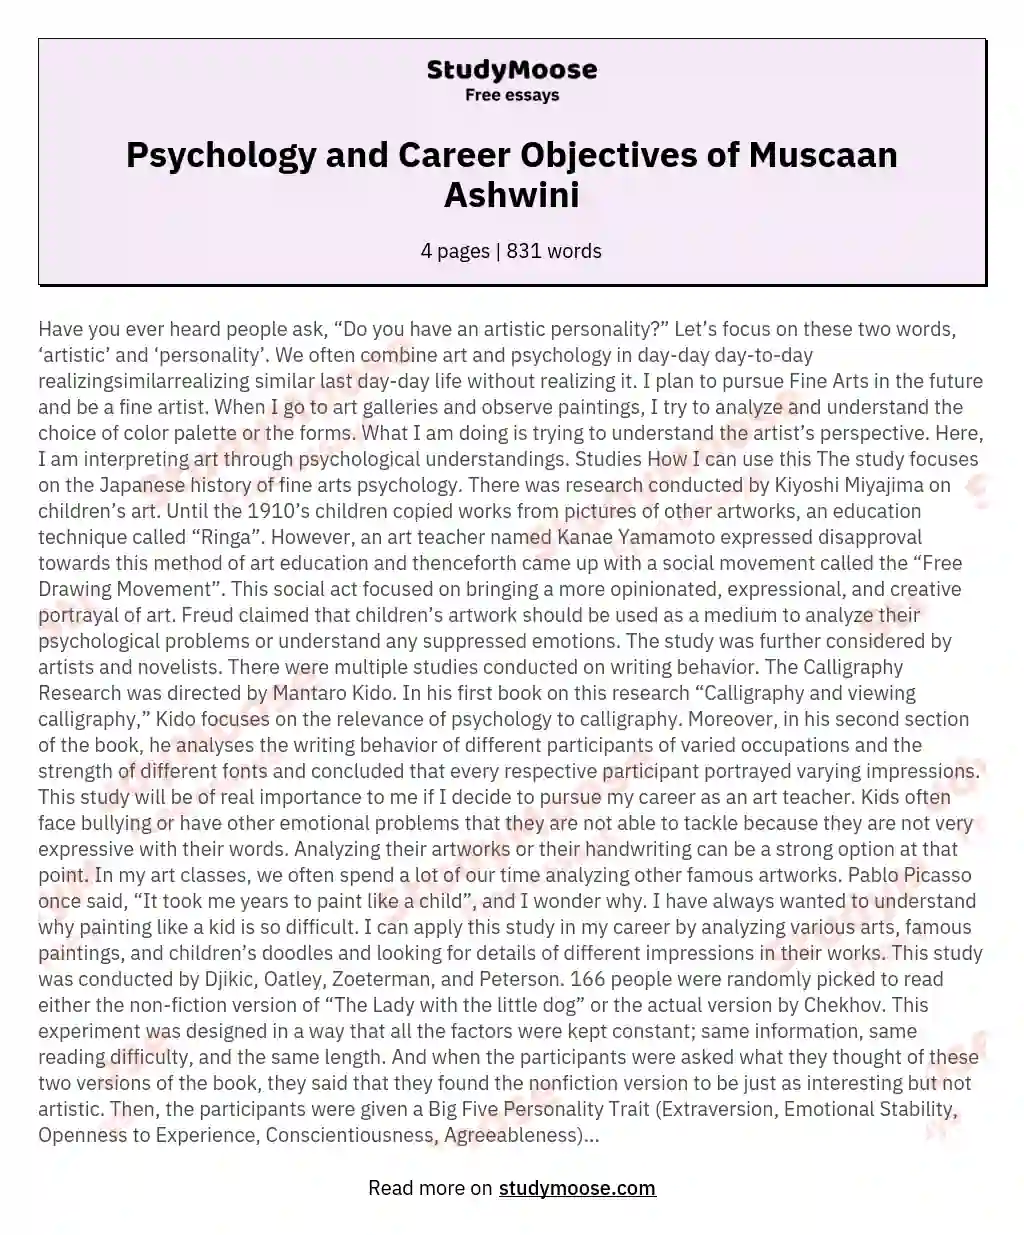 Psychology and Career Objectives of Muscaan Ashwini essay